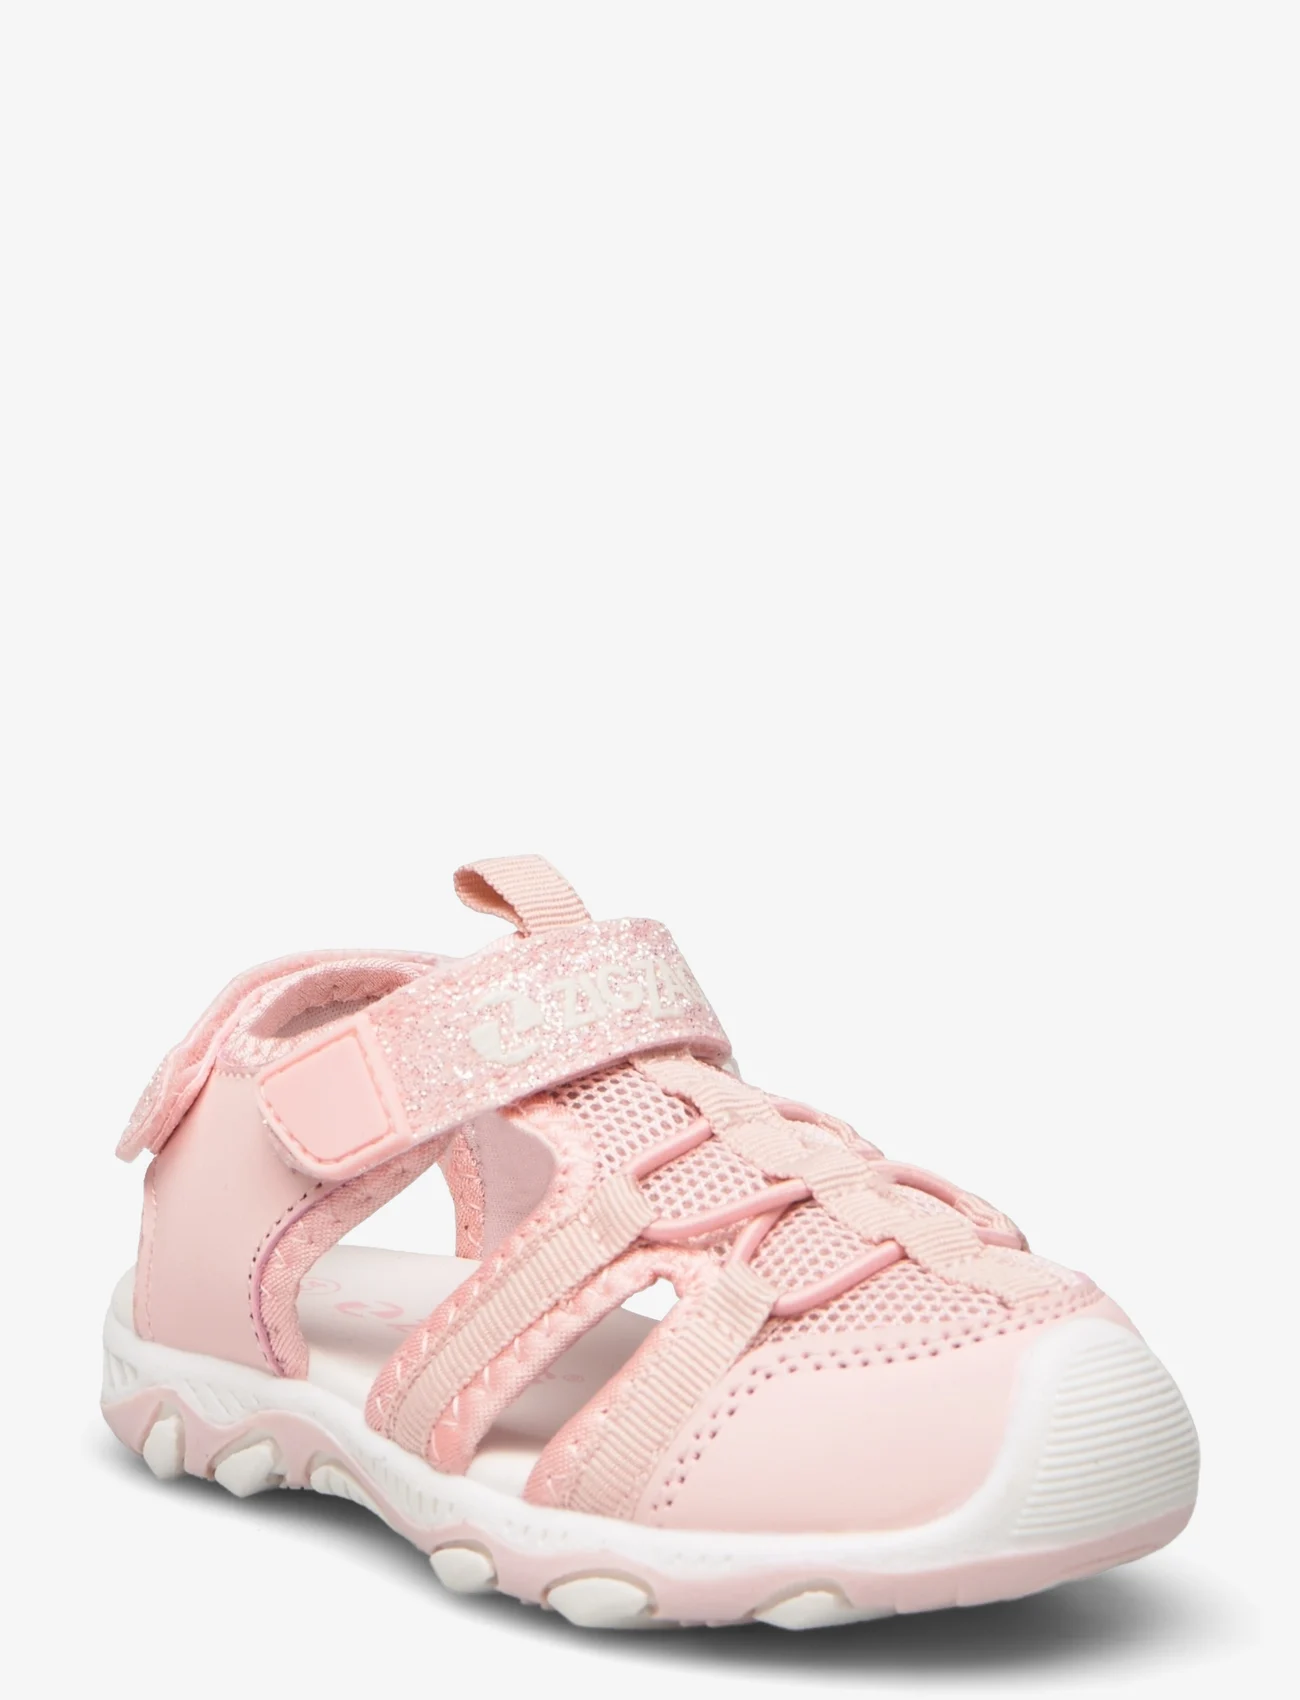 ZigZag - Fipa Kids Closed Toe Sandal - sommarfynd - rosewater - 0